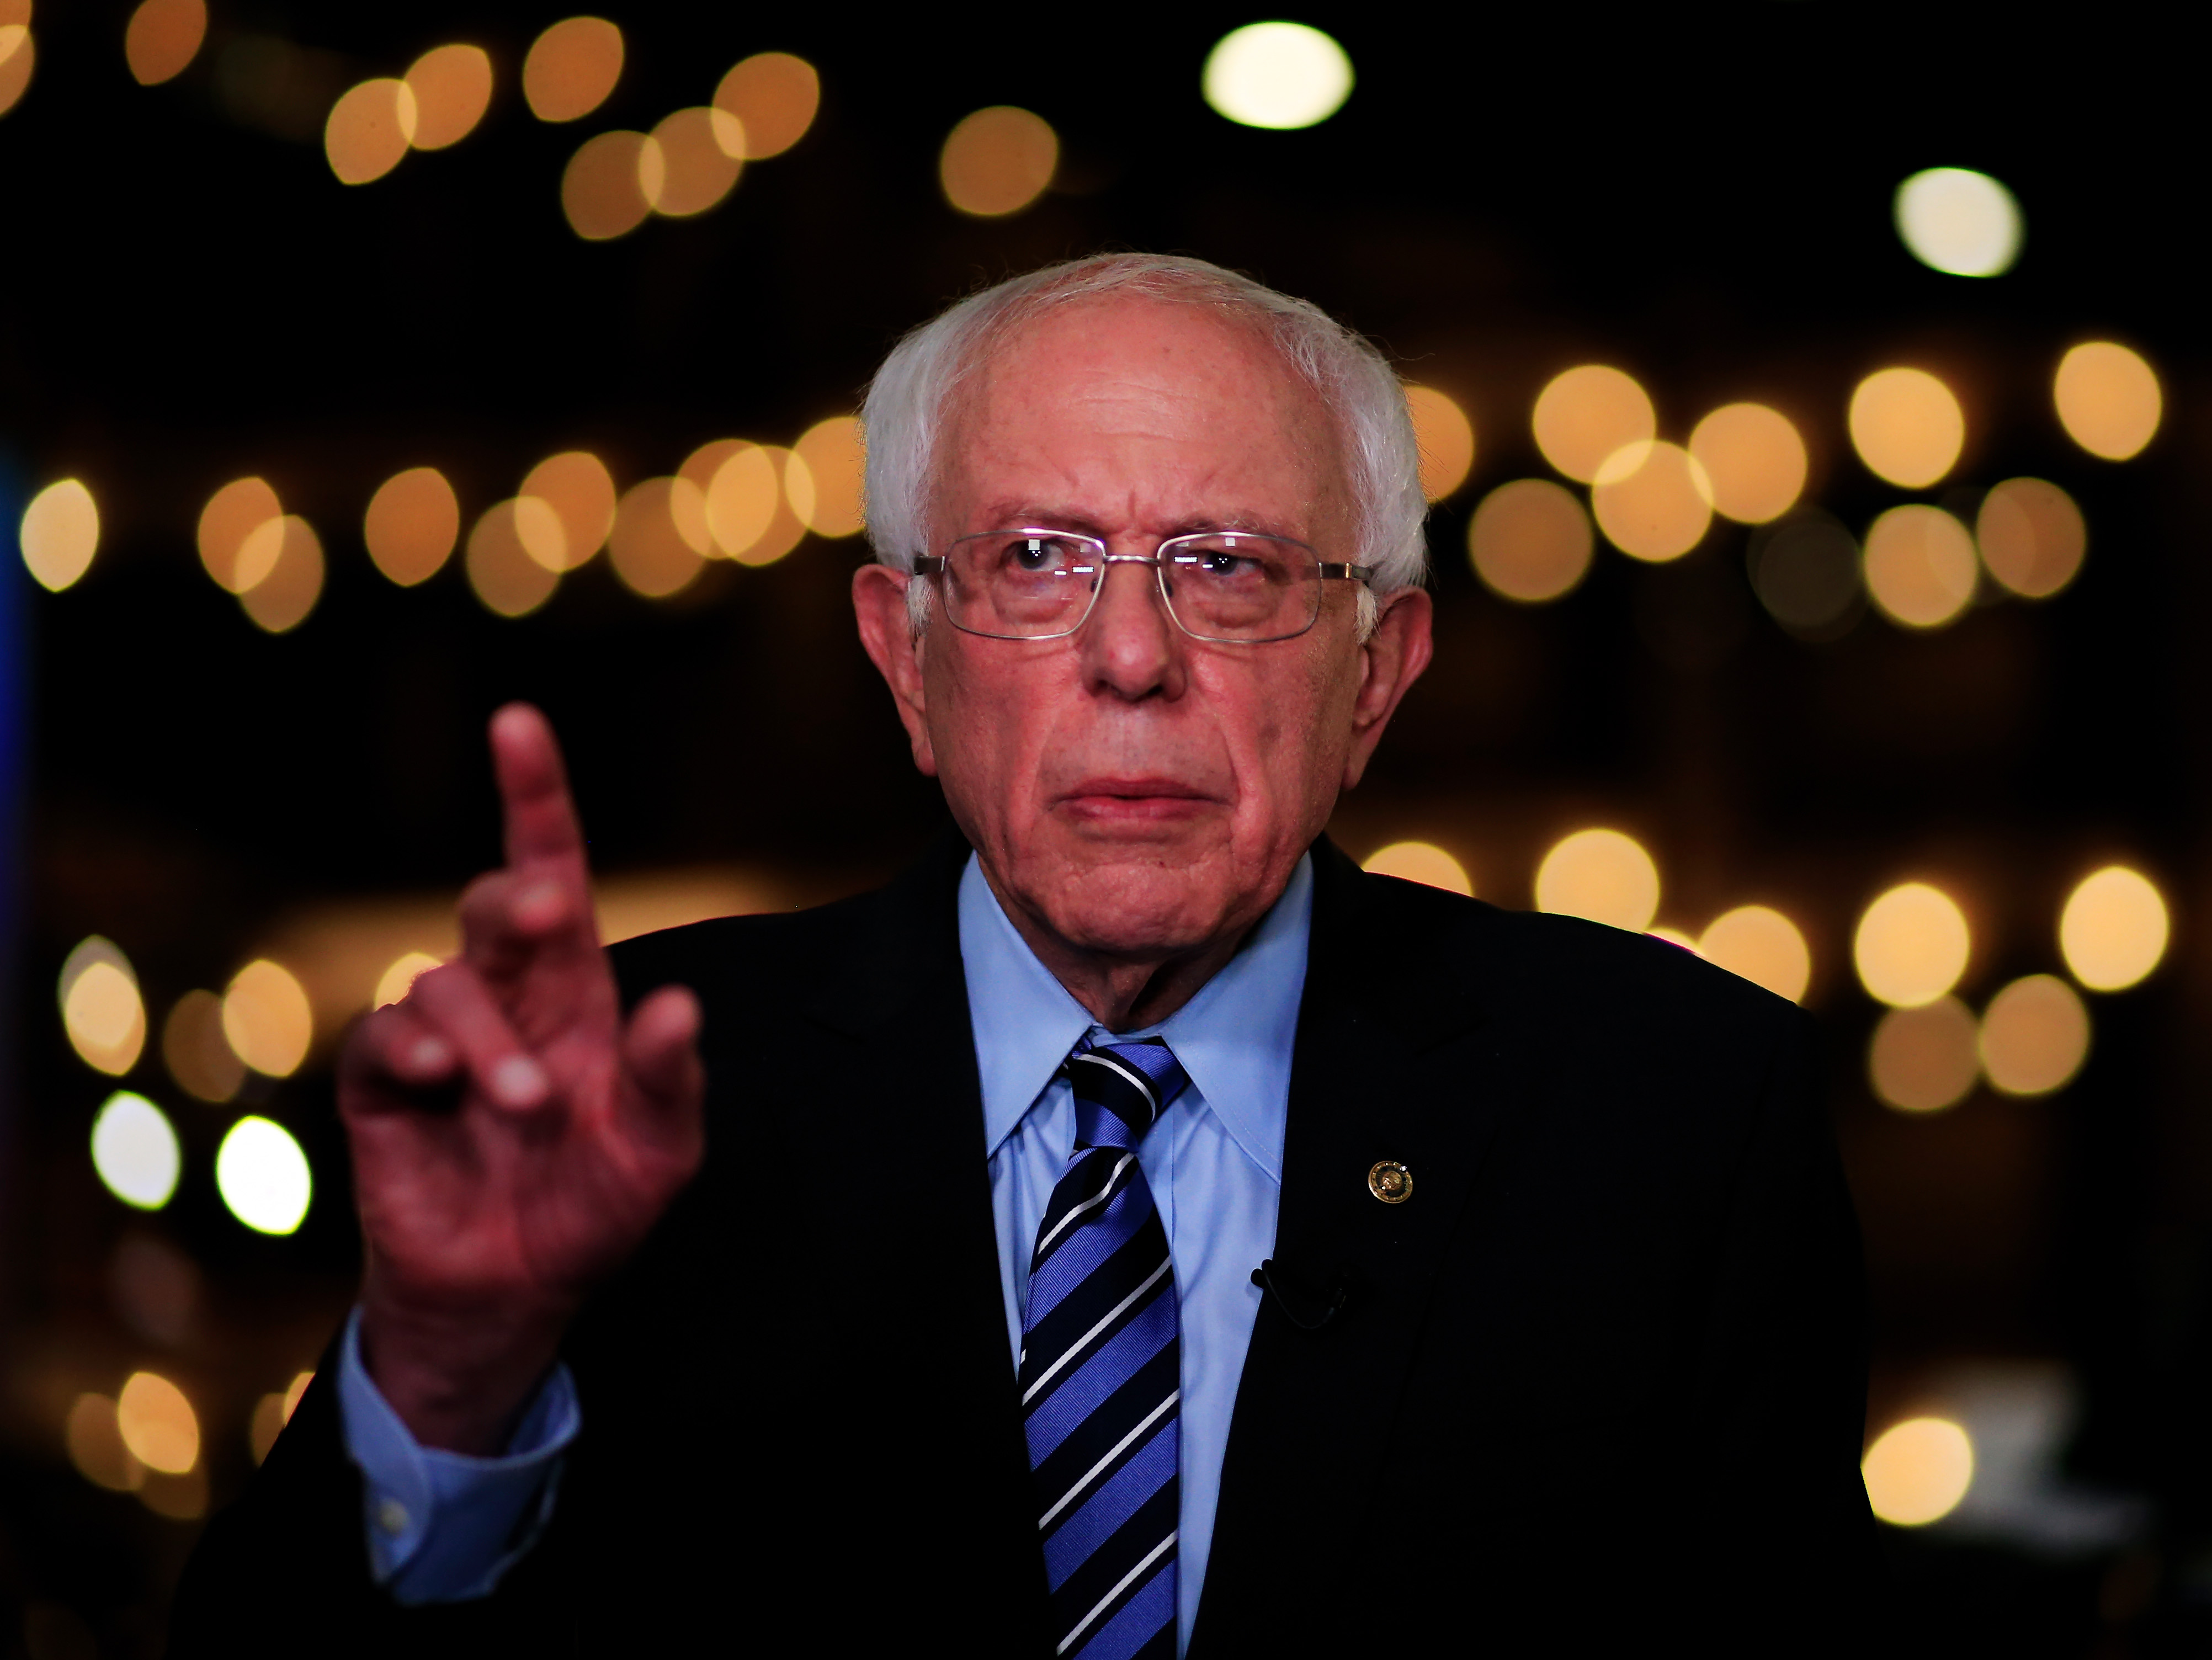 Bernie Sanders Won The Second Democratic Debate According To You Guys Spin